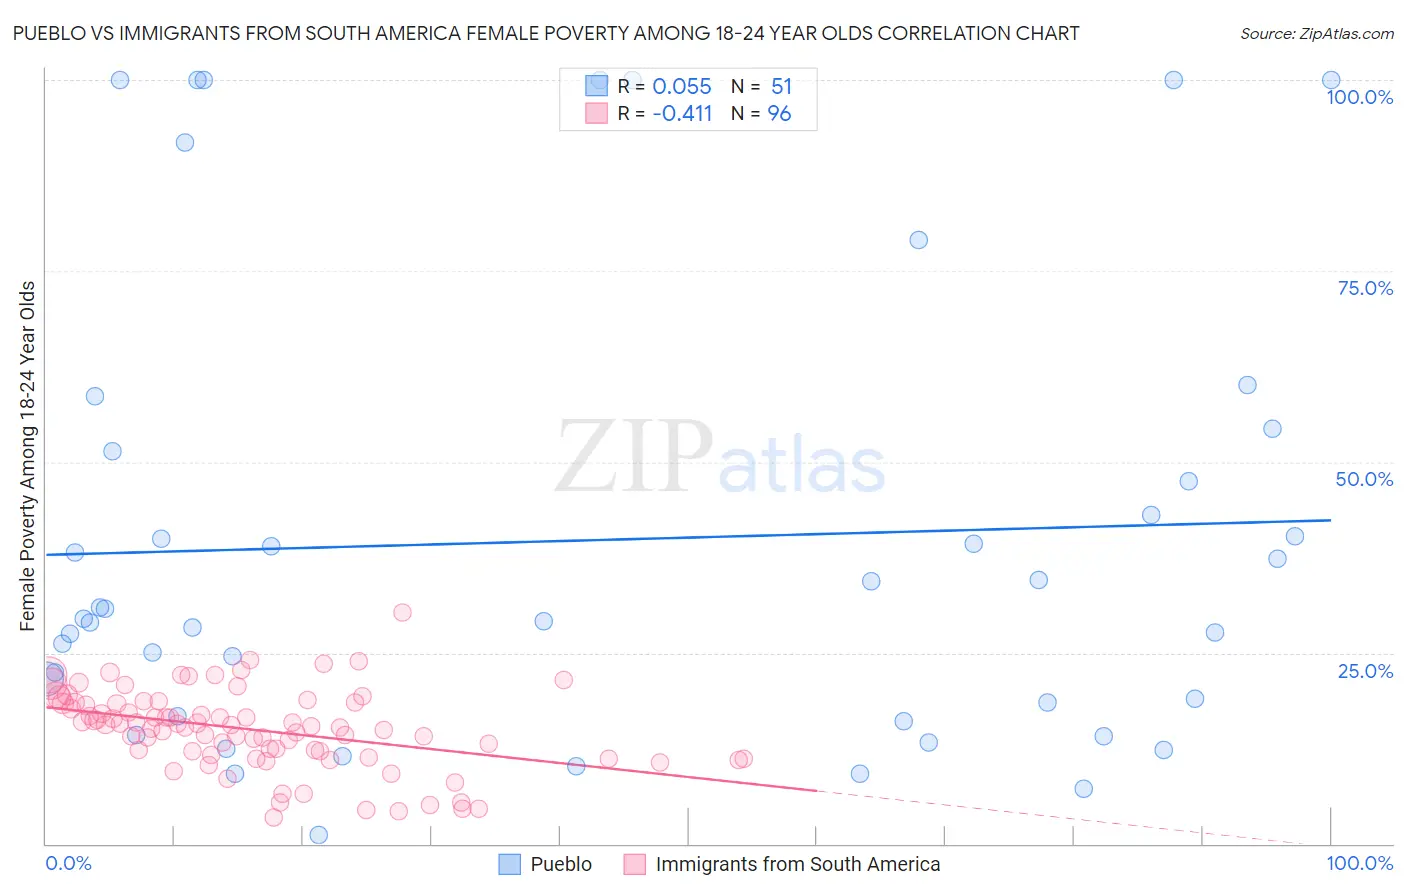 Pueblo vs Immigrants from South America Female Poverty Among 18-24 Year Olds